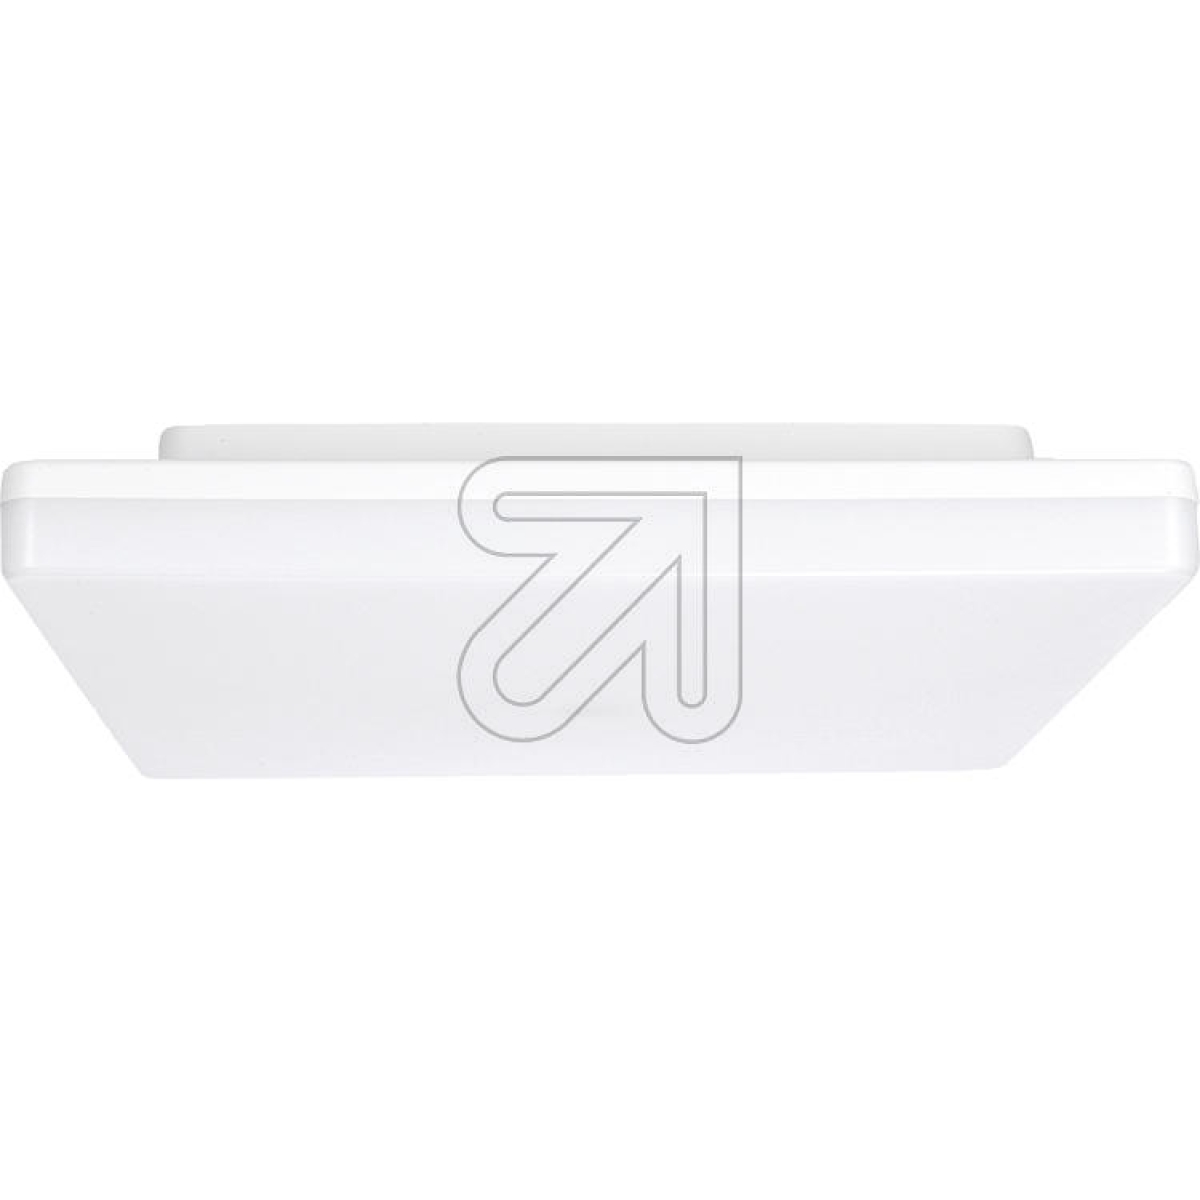 mlightLED wall and ceiling light square IP65 18W 3000K/4000K/5700K 81-3125Article-No: 629440